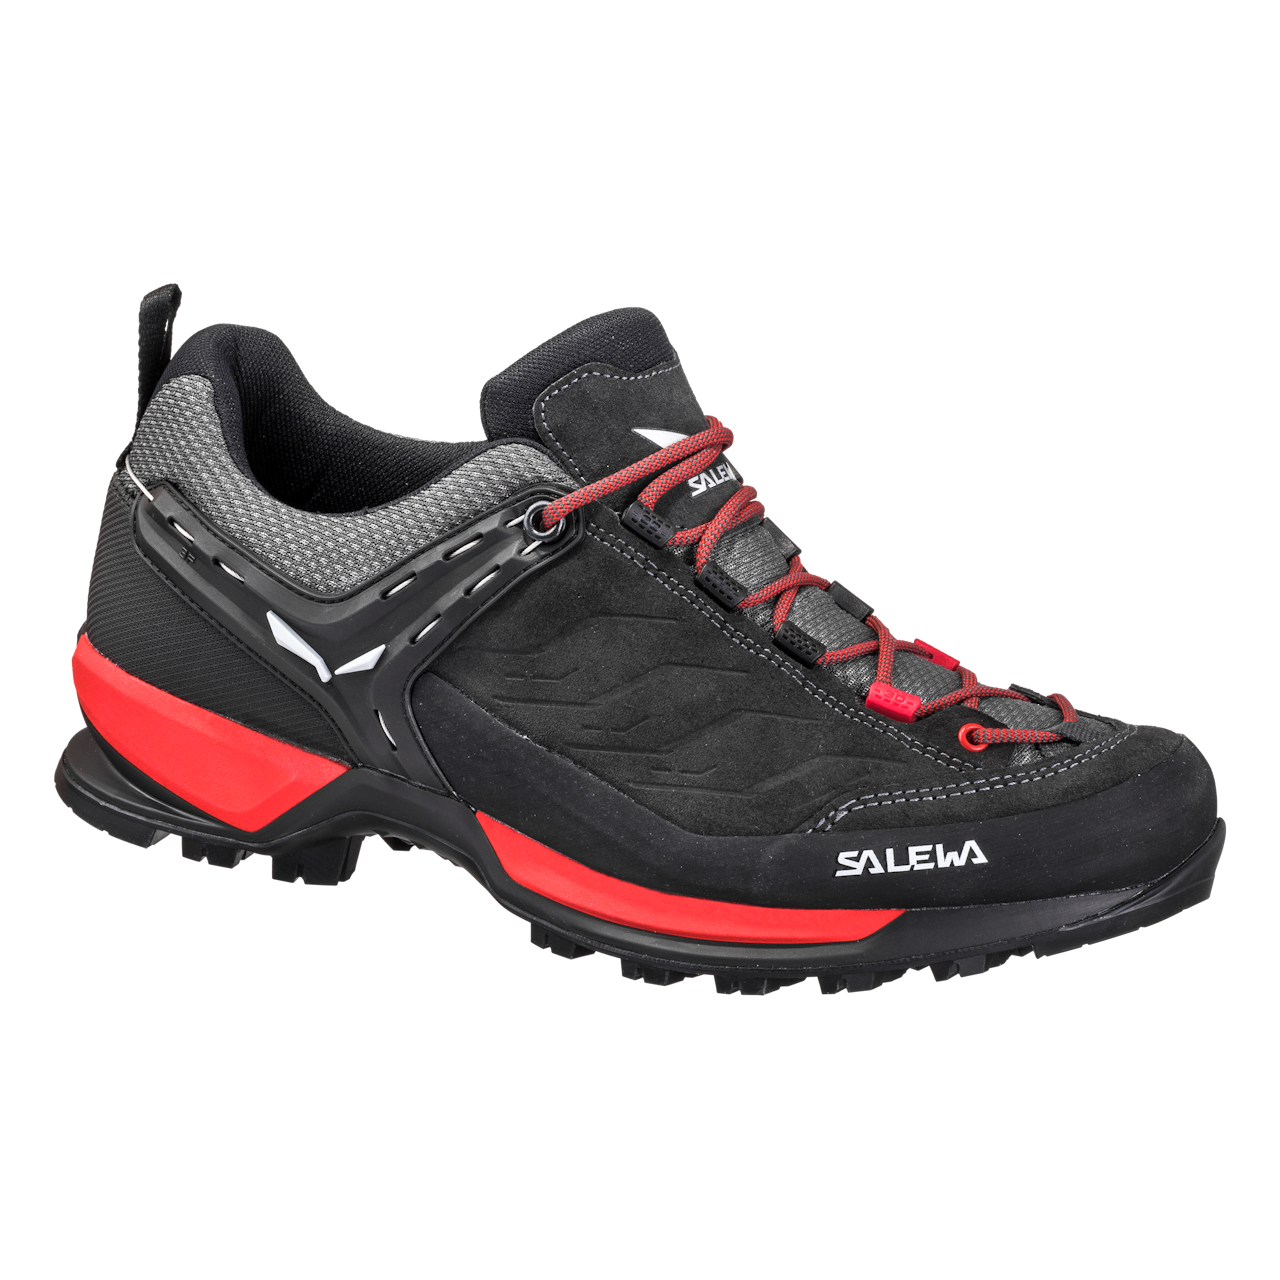 Salewa Men's Mountain Trainer 2 - Various Sizes and Colors